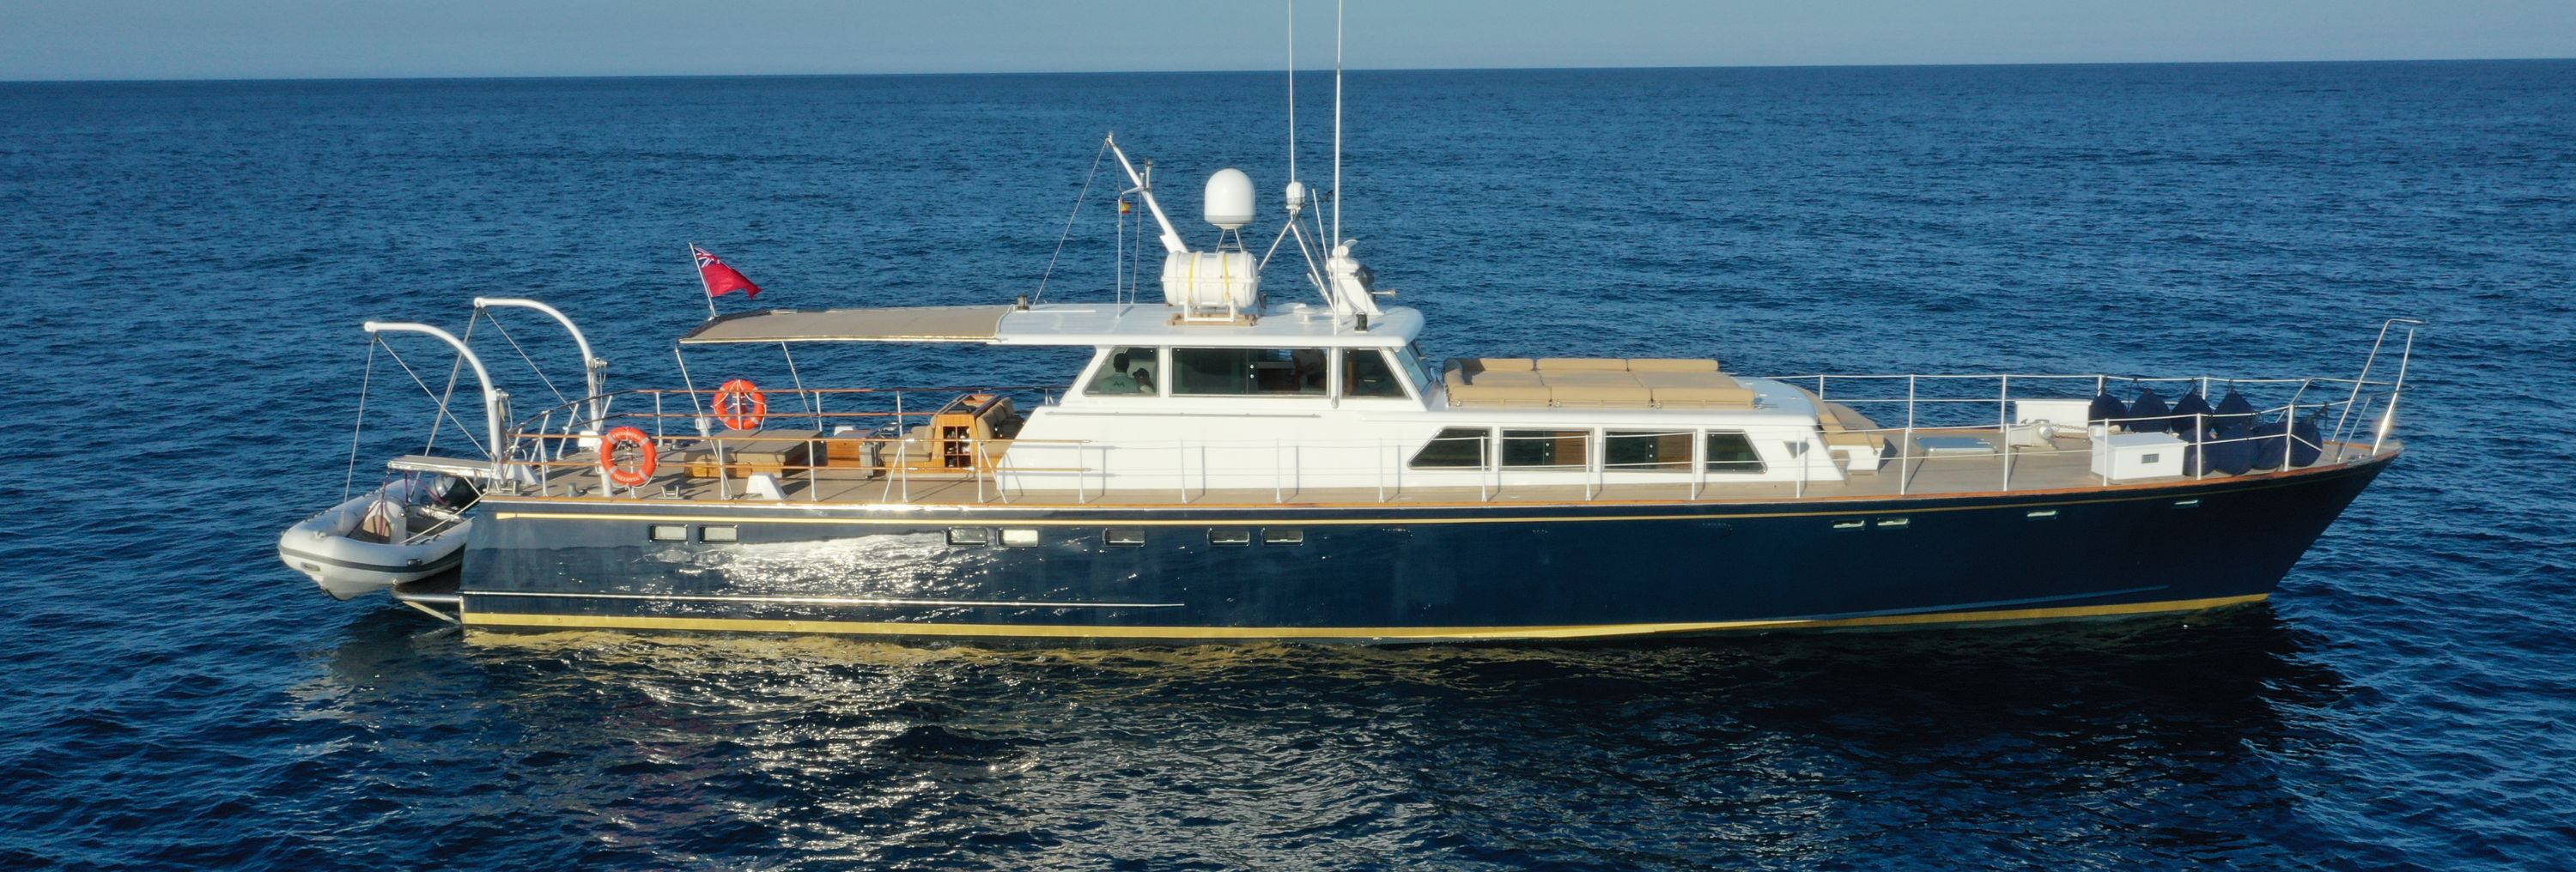 CIUTADELLA : New Yacht Available For Charter